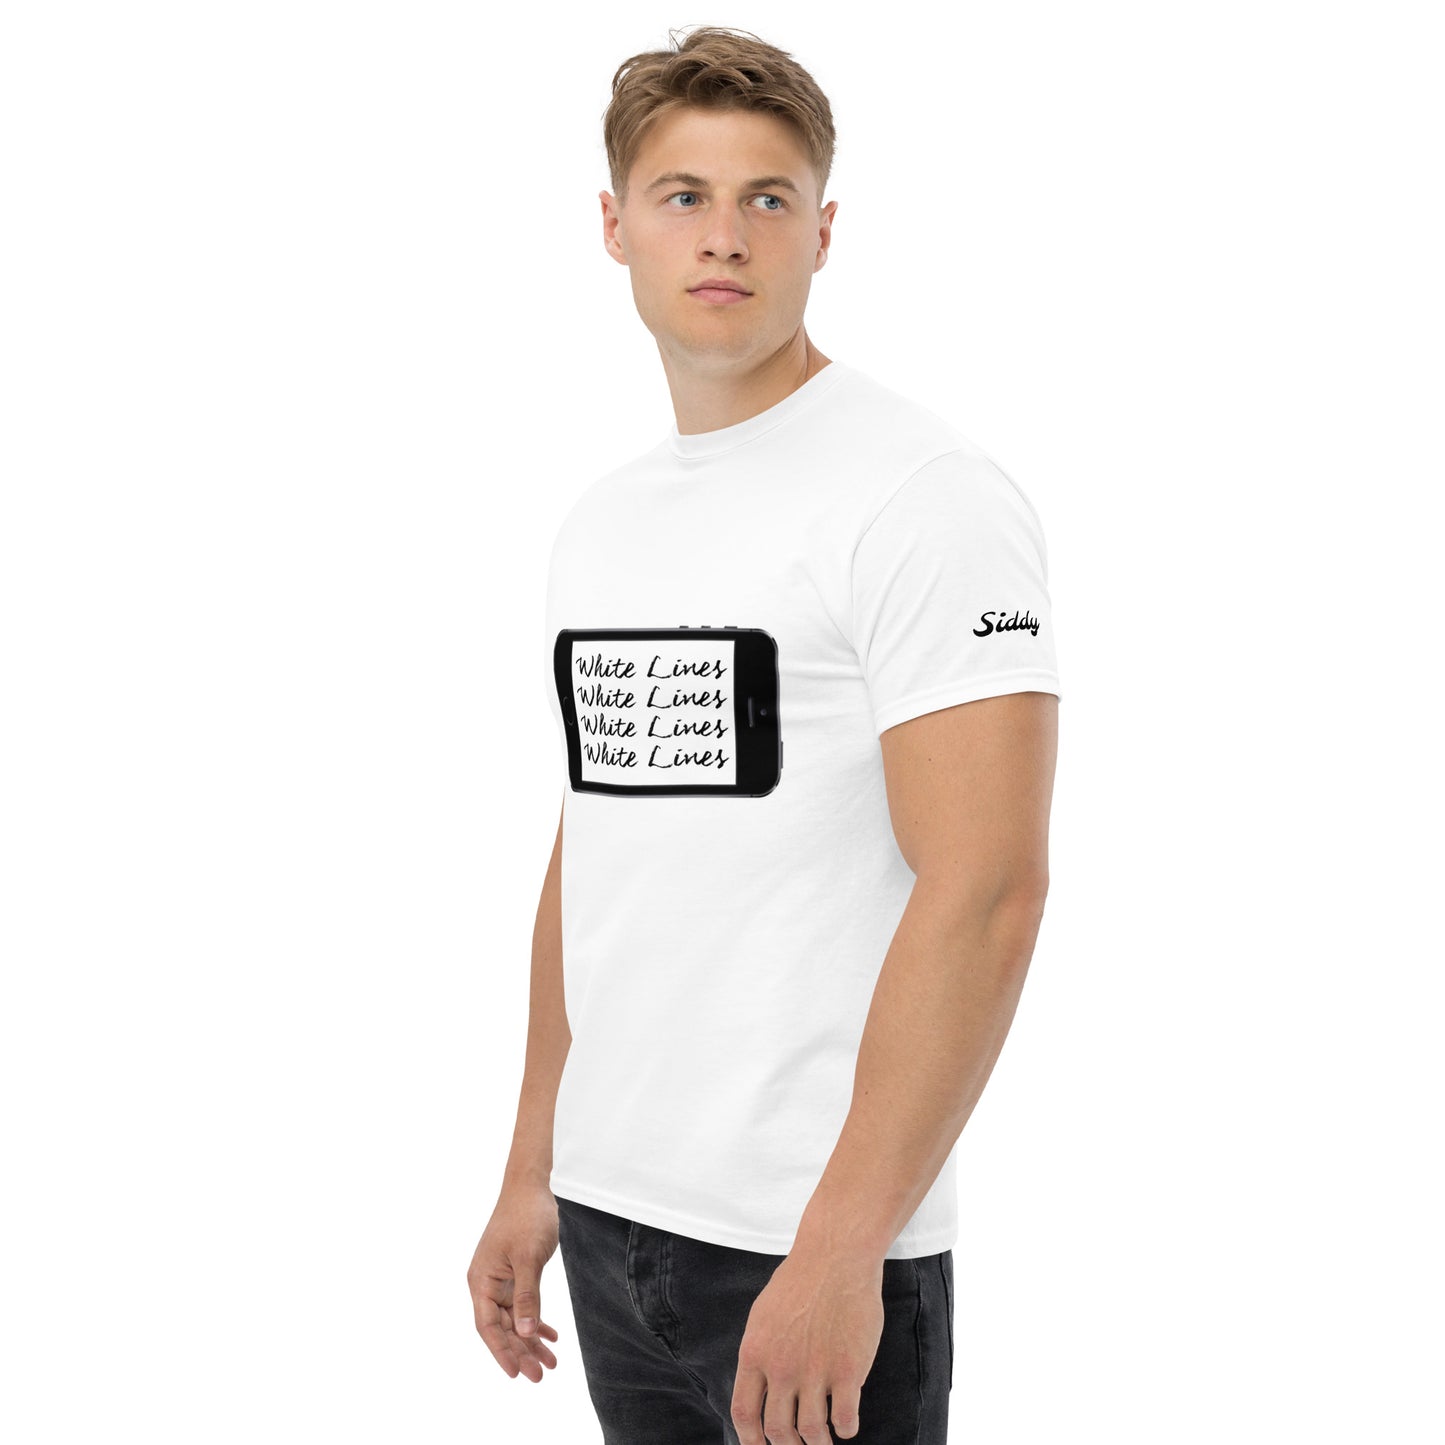 Siddy White Lines Men’s Classic Tee - T Shirt